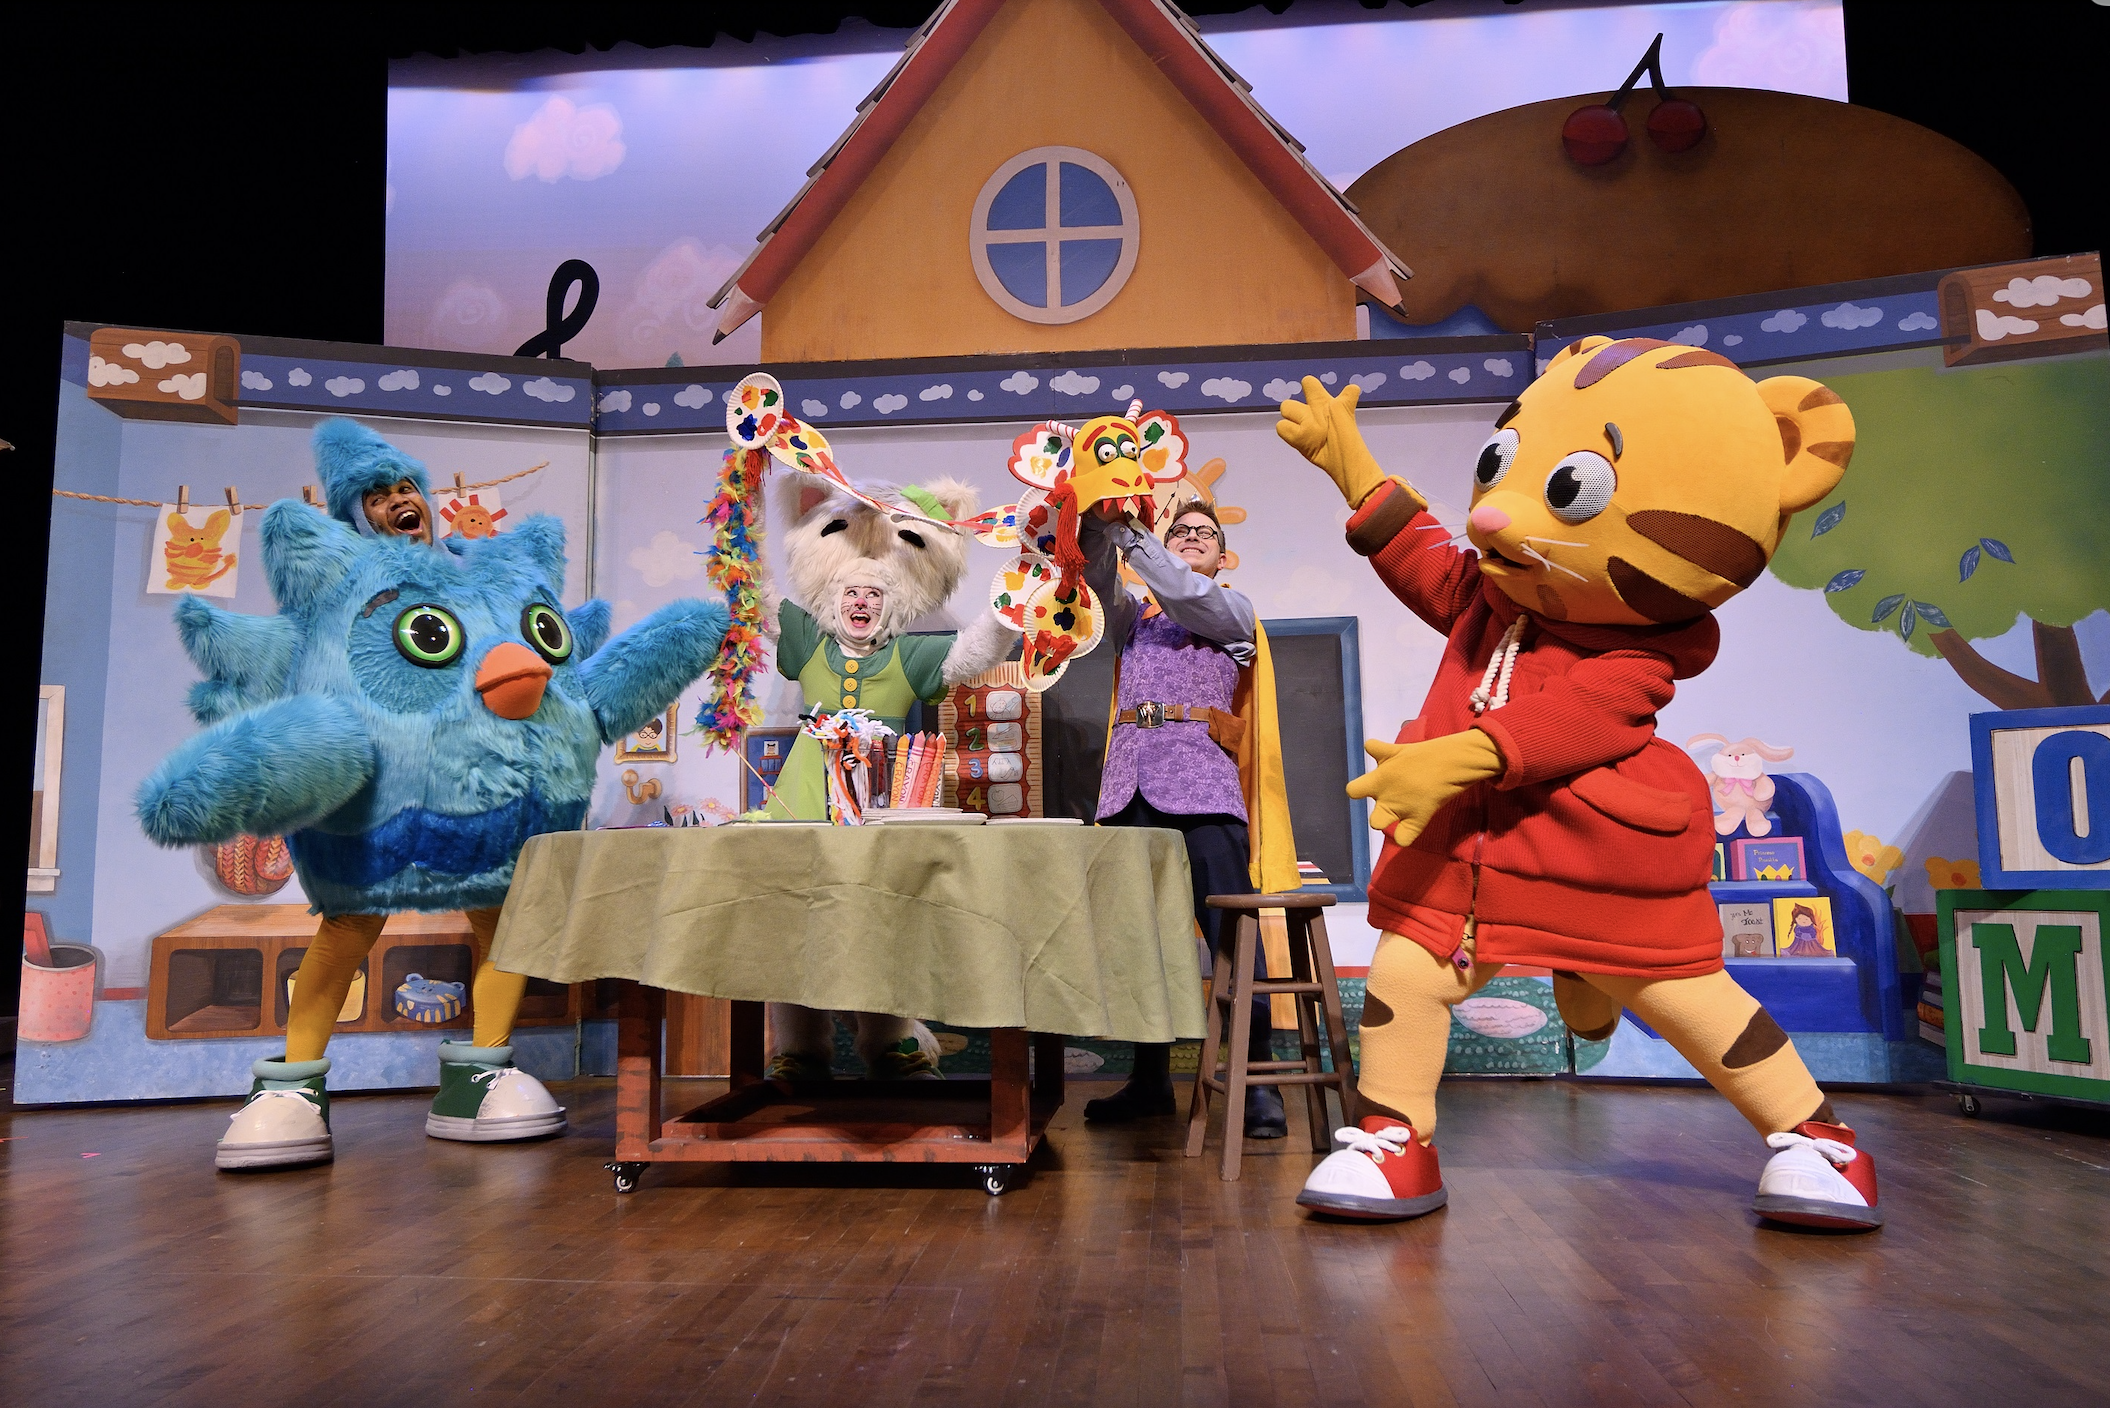 Daniel Tiger’s Neighborhood Live Returns to The Palace Theatre